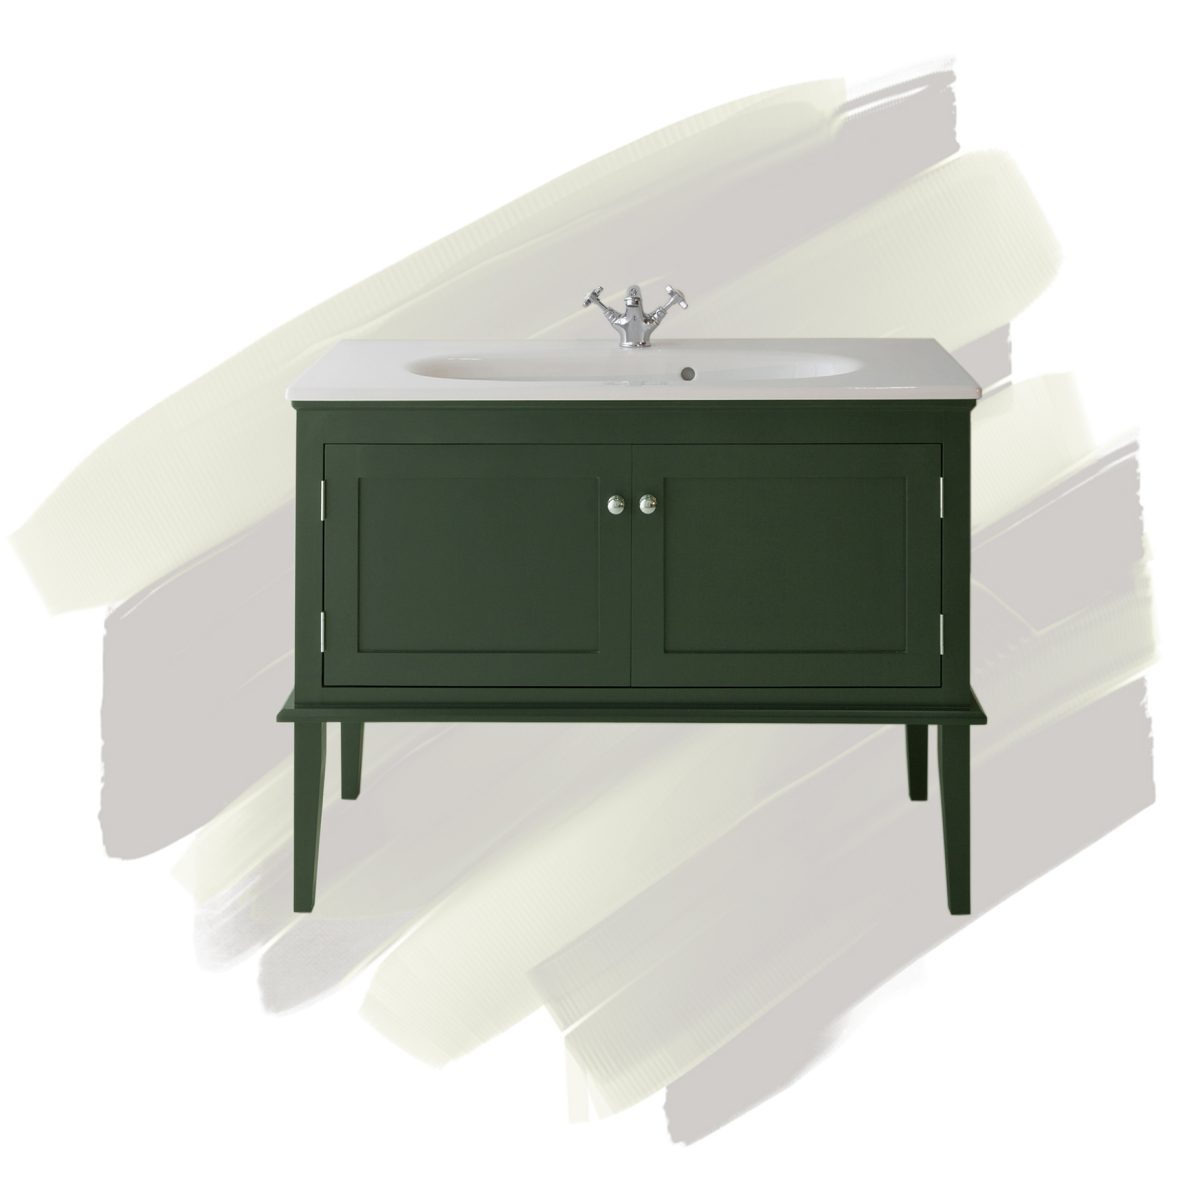 Hamar Basin and Vanity Unit in Olive Green..